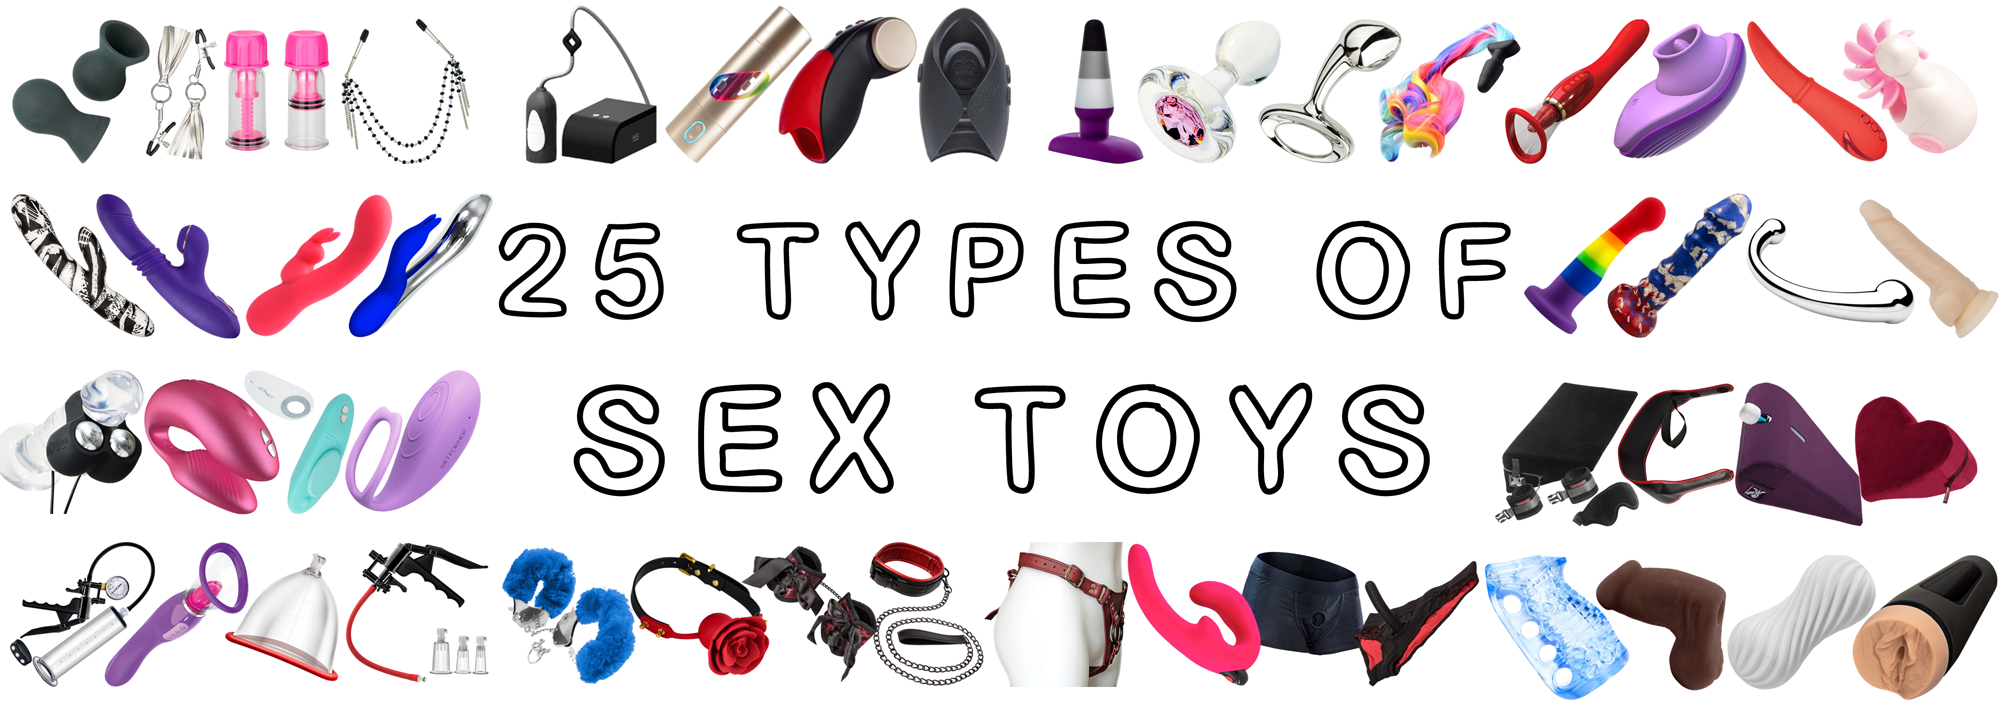 25 Types of Sex Toys A Guide to Help You Know Whats Out There photo